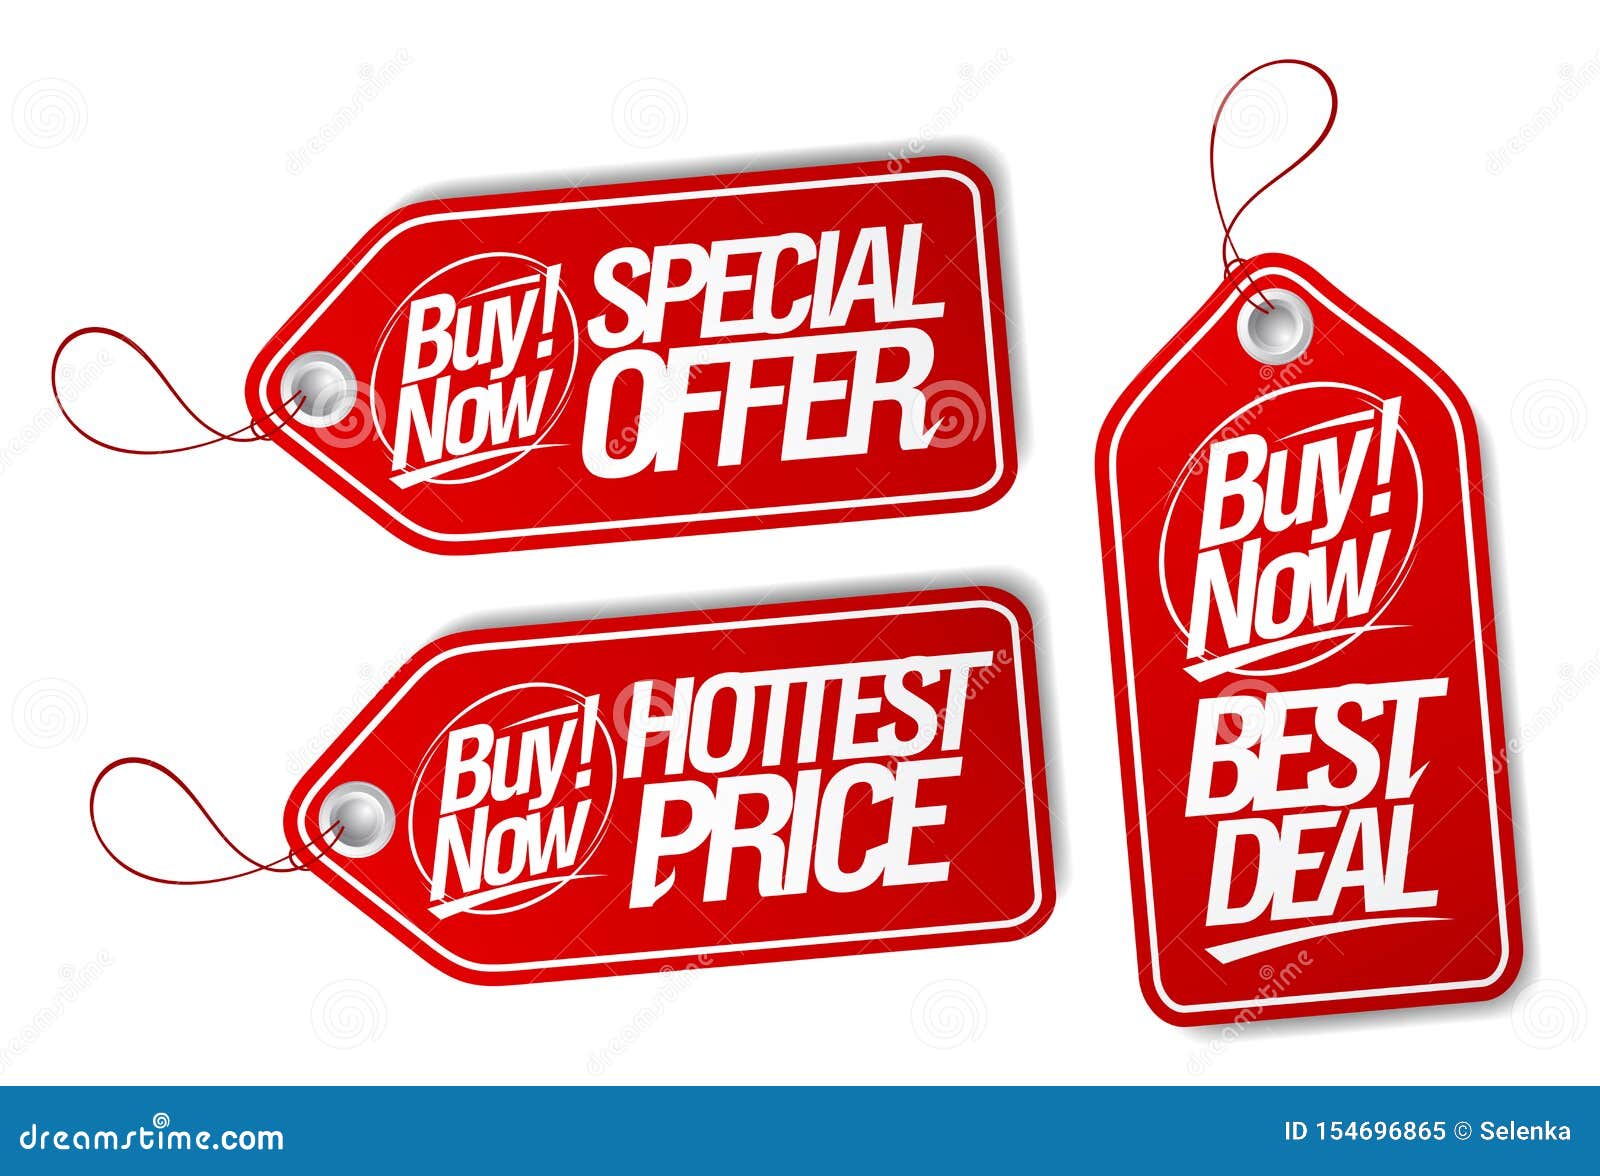 buy now, special offer, best deal and hottest price tags